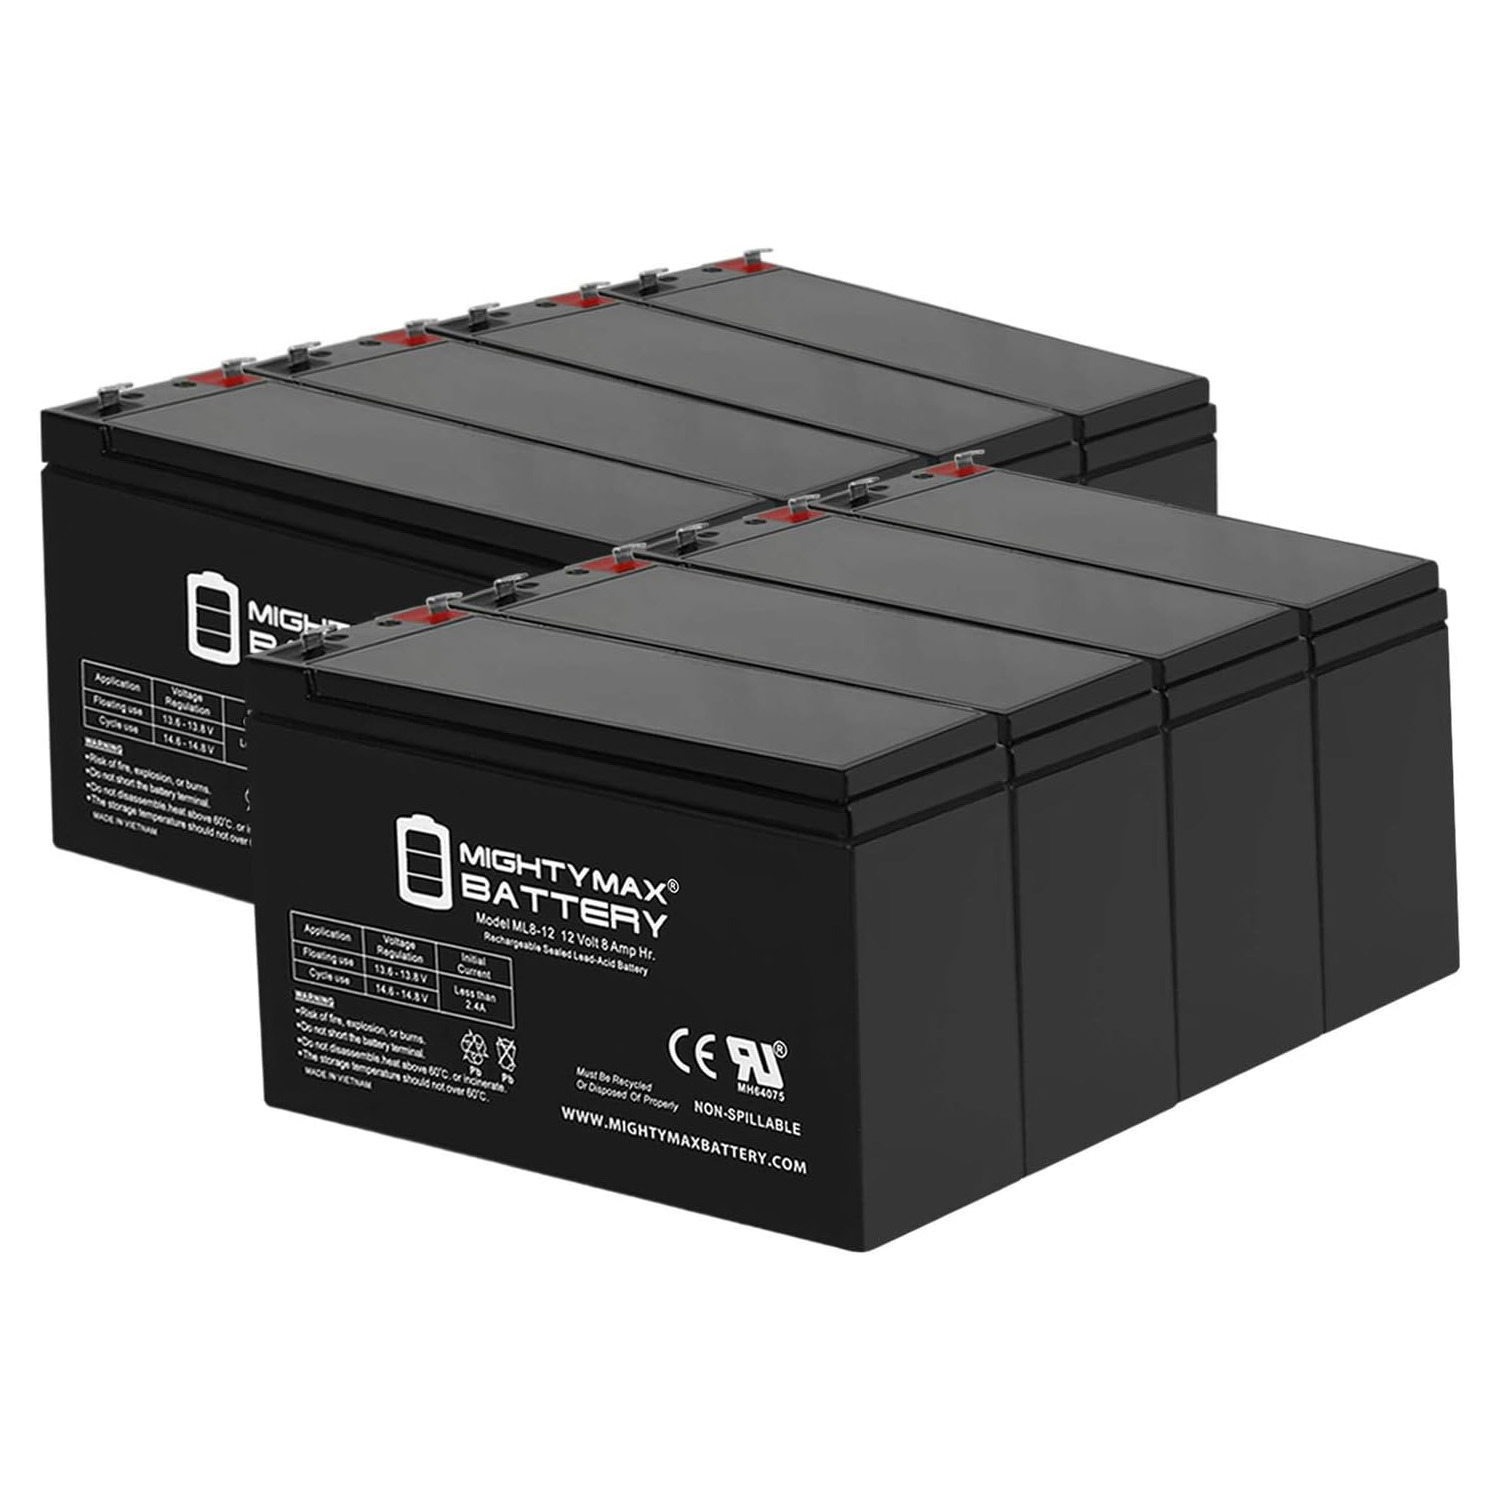 12V 8Ah Battery Replacement for Sola 310-750-A, B510-1250-E - 8 Pack